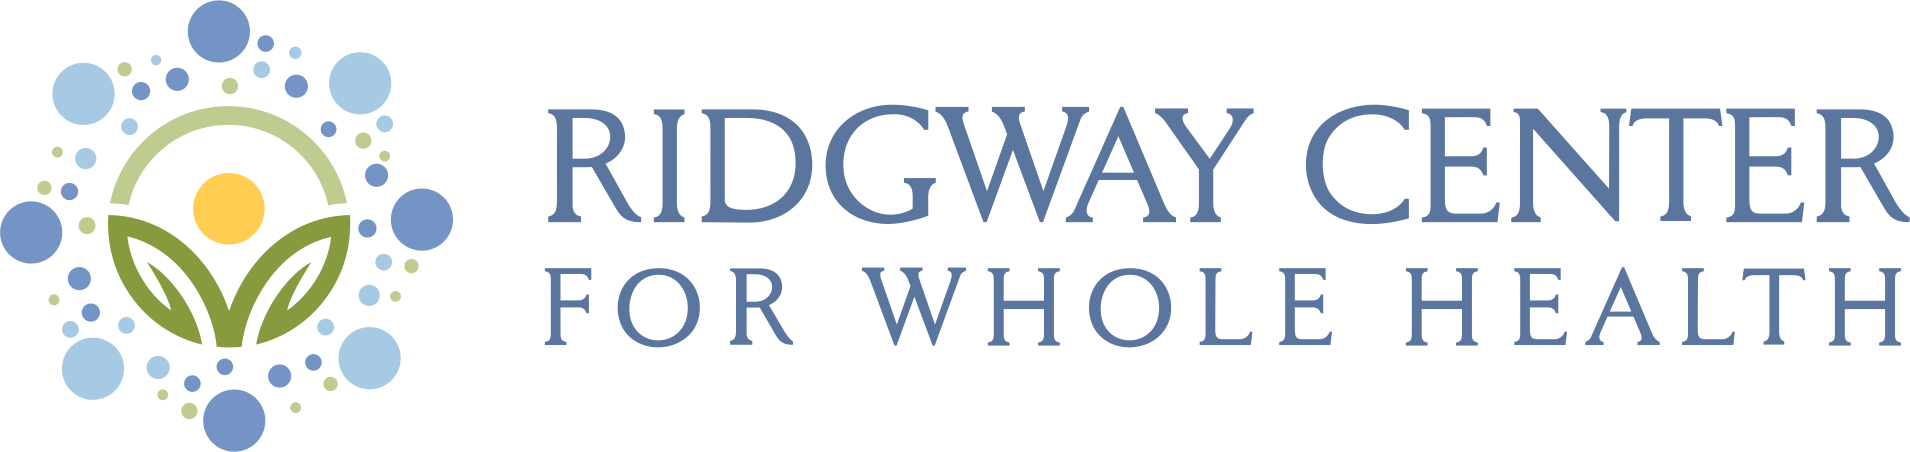 Ridgway-Center-for-Whole-Health-logo